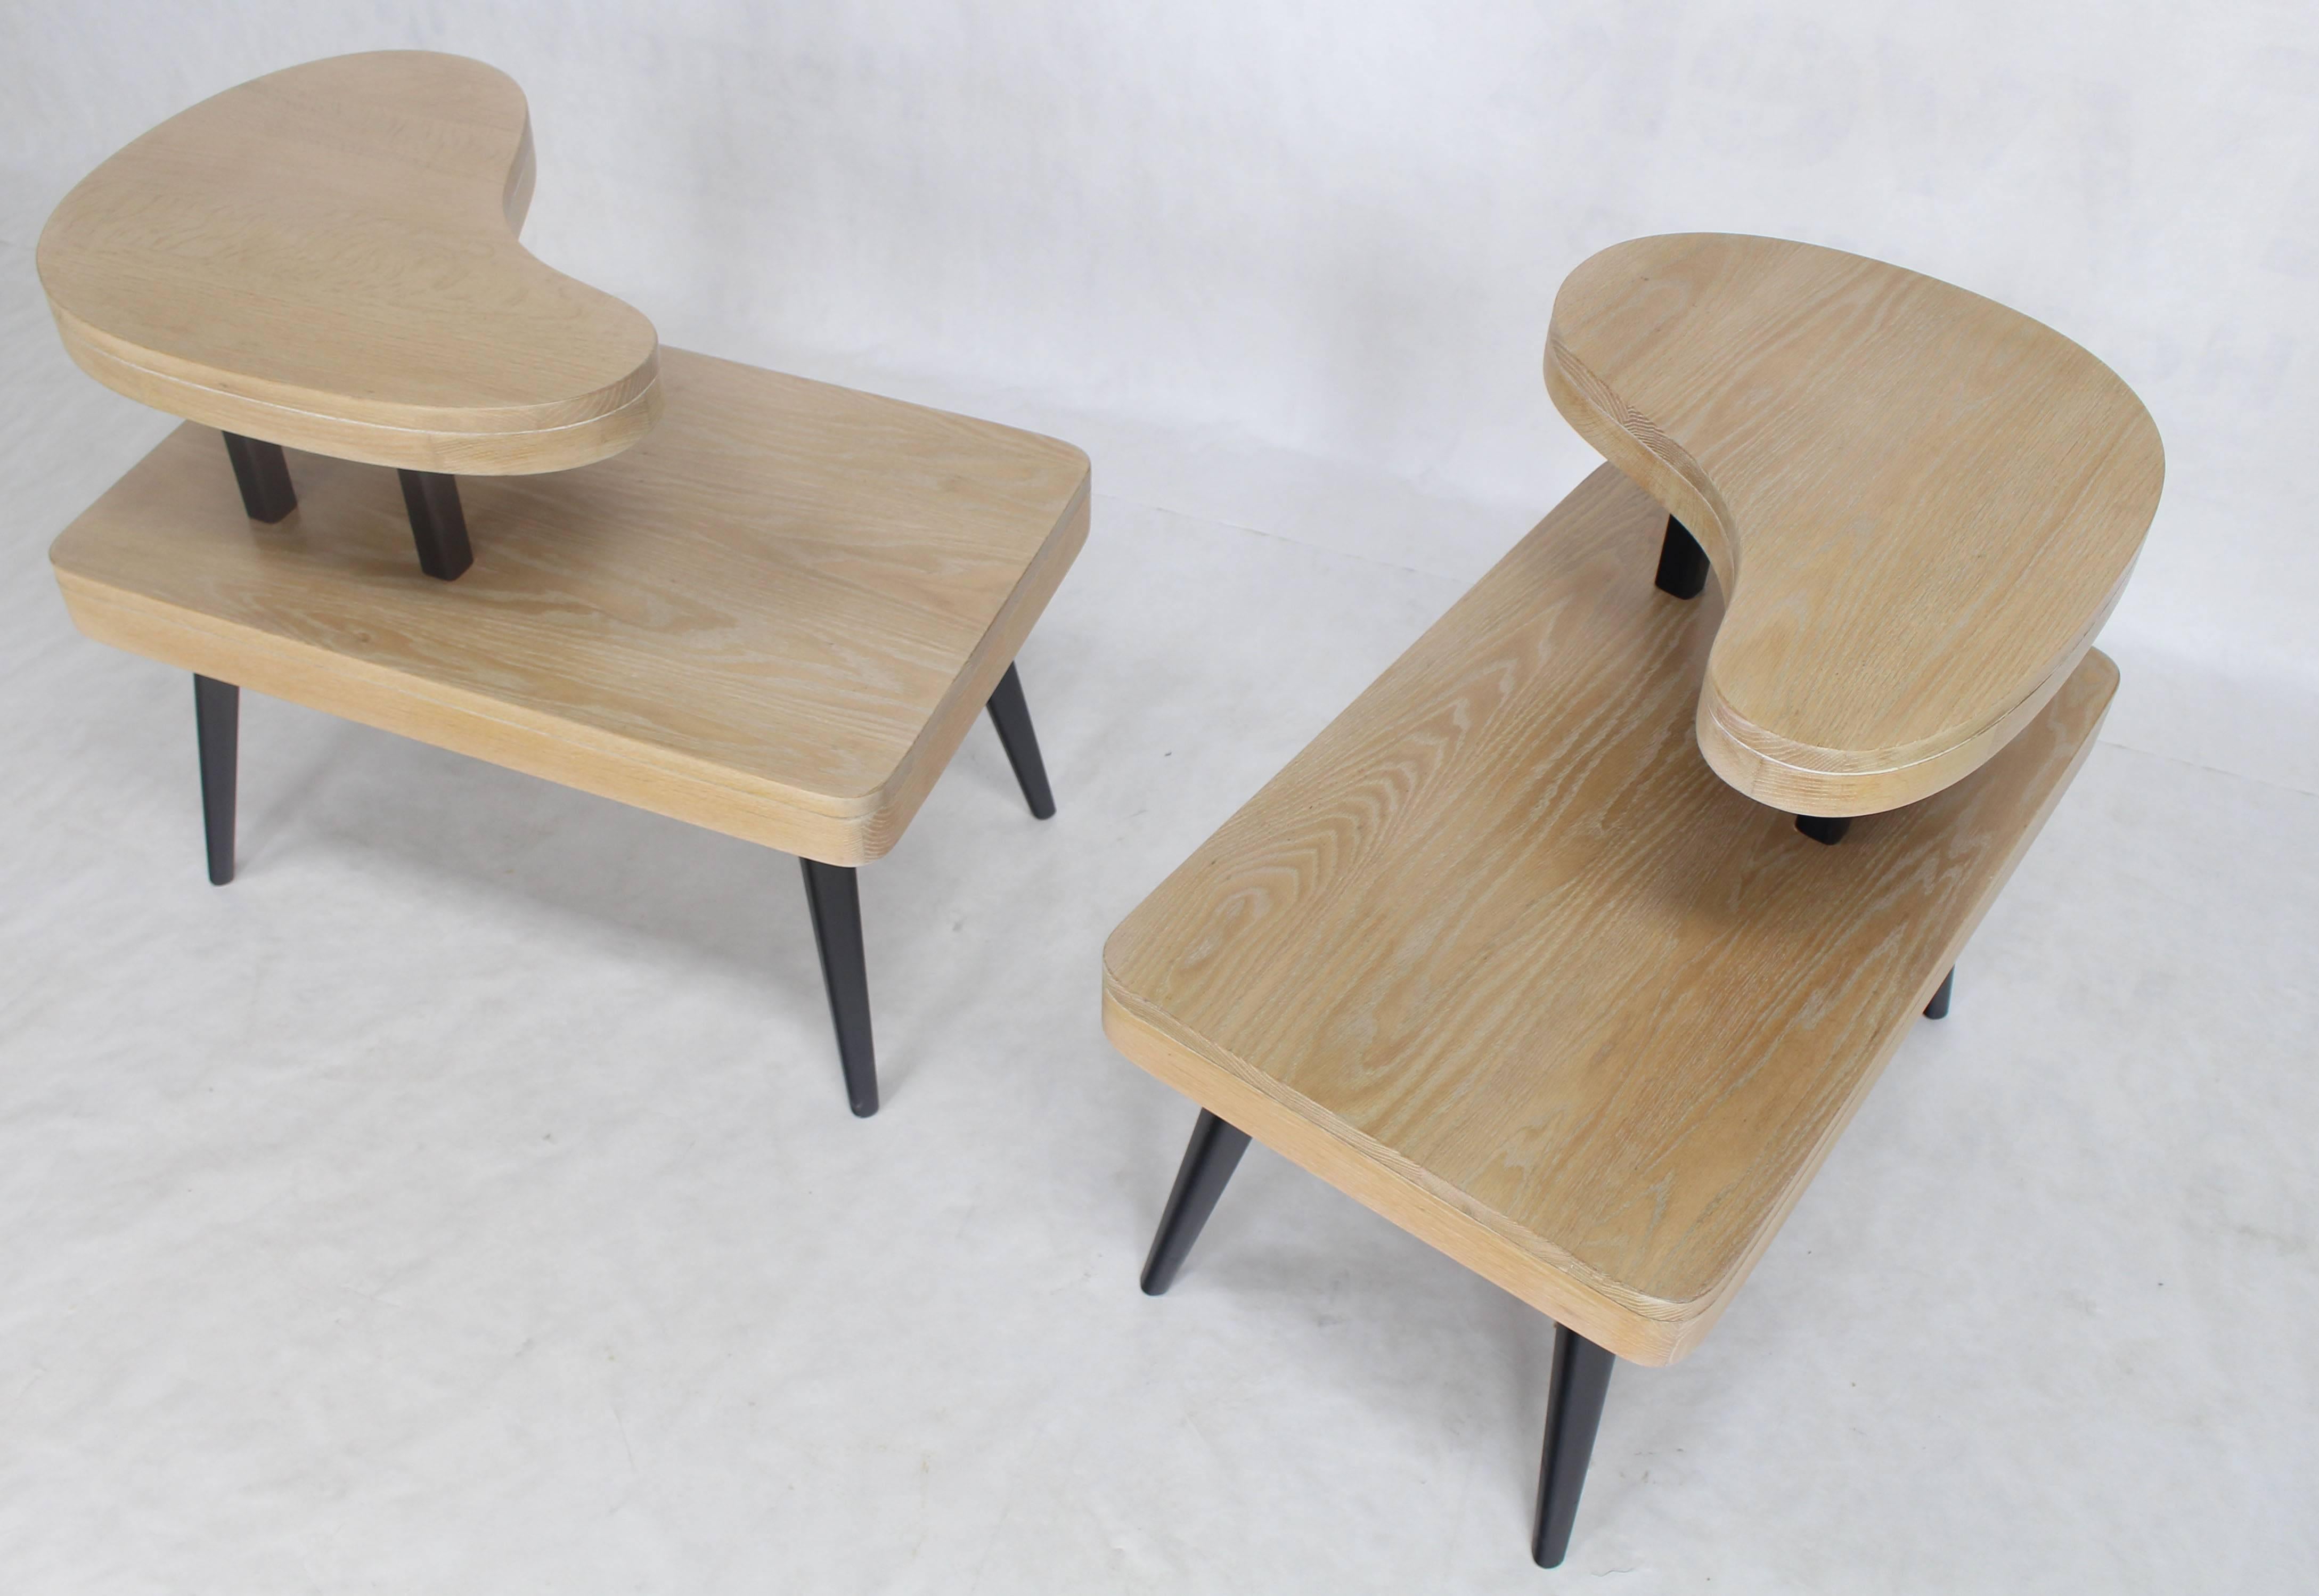 20th Century Cerused Oak Two-Tier Mid-Century Modern Organic Two-Tone End Tables Stands, Pair For Sale